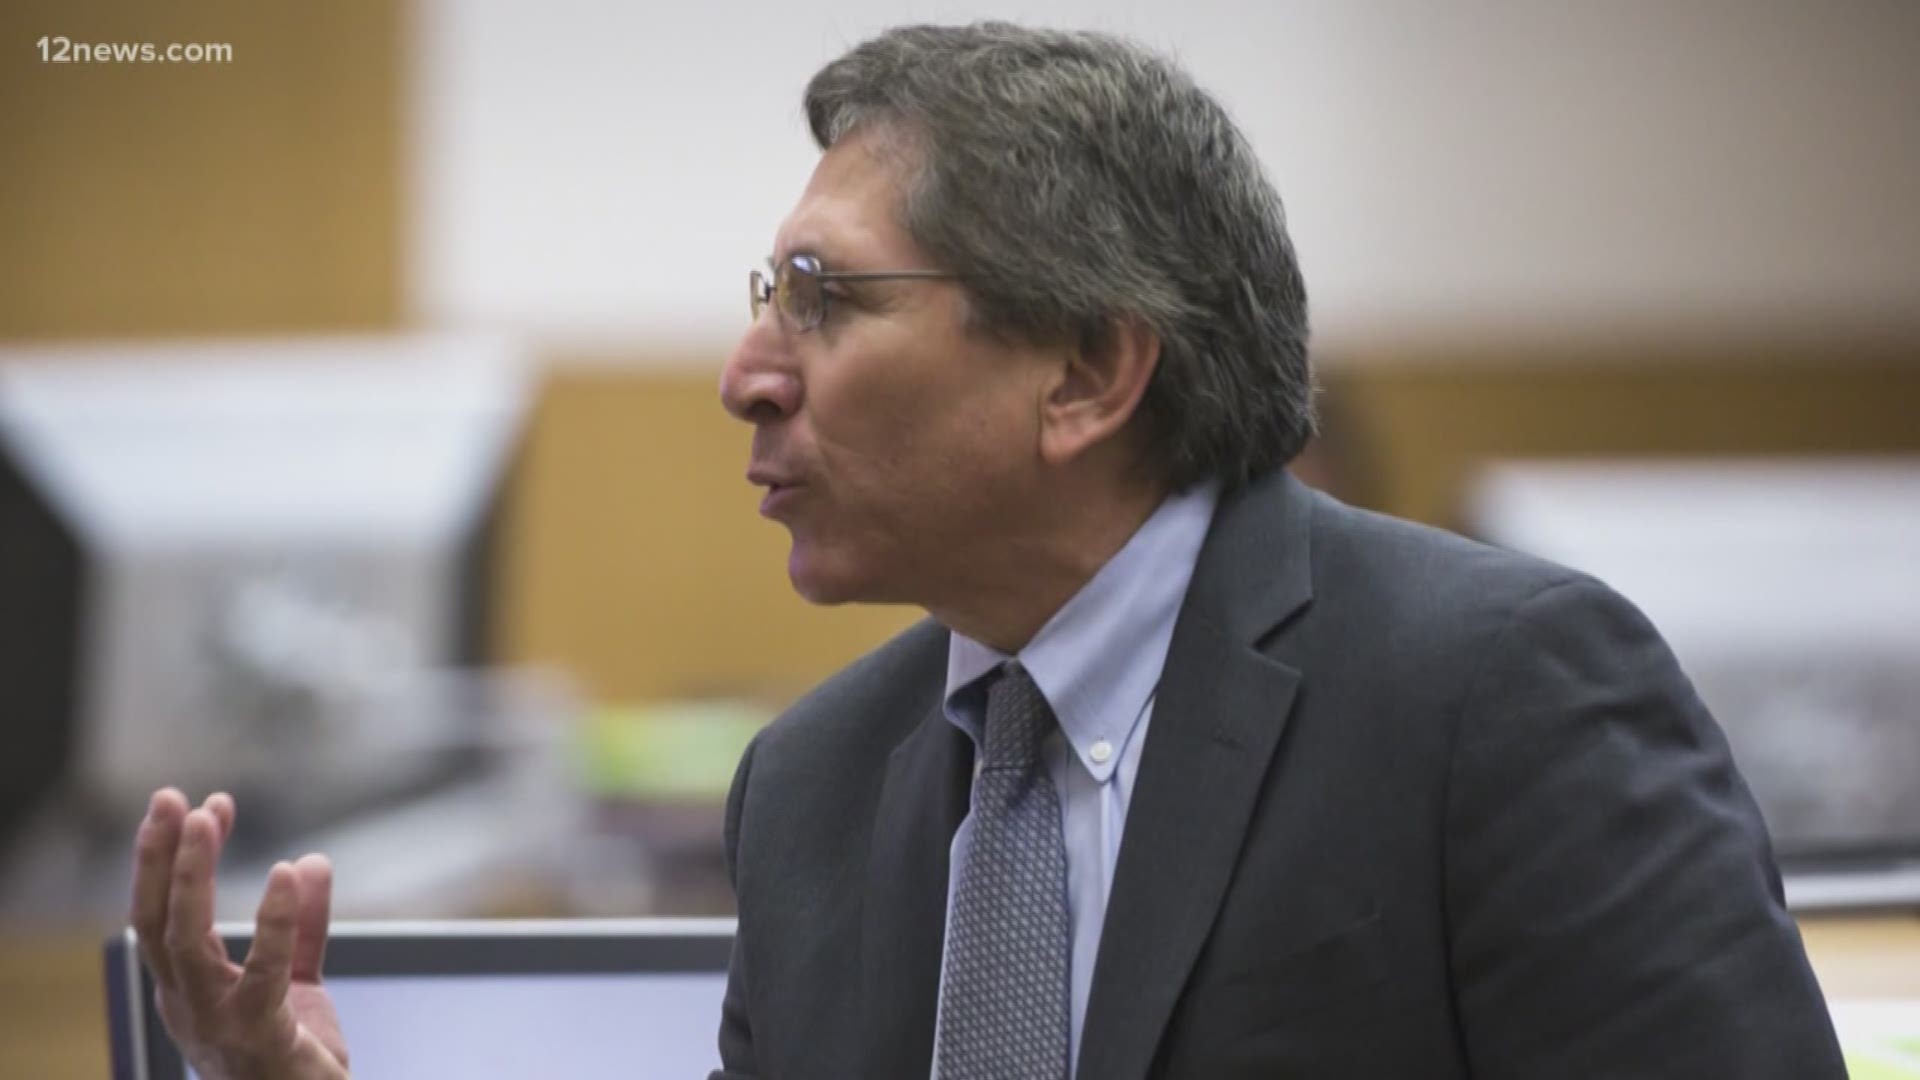 According to the State Bar's ethics complaint against star prosecutor Juan Martinez, women in Maricopa County Attorney Bill Montgomery's office kept a running scorecard of Juan Martinez's unprofessional conduct.